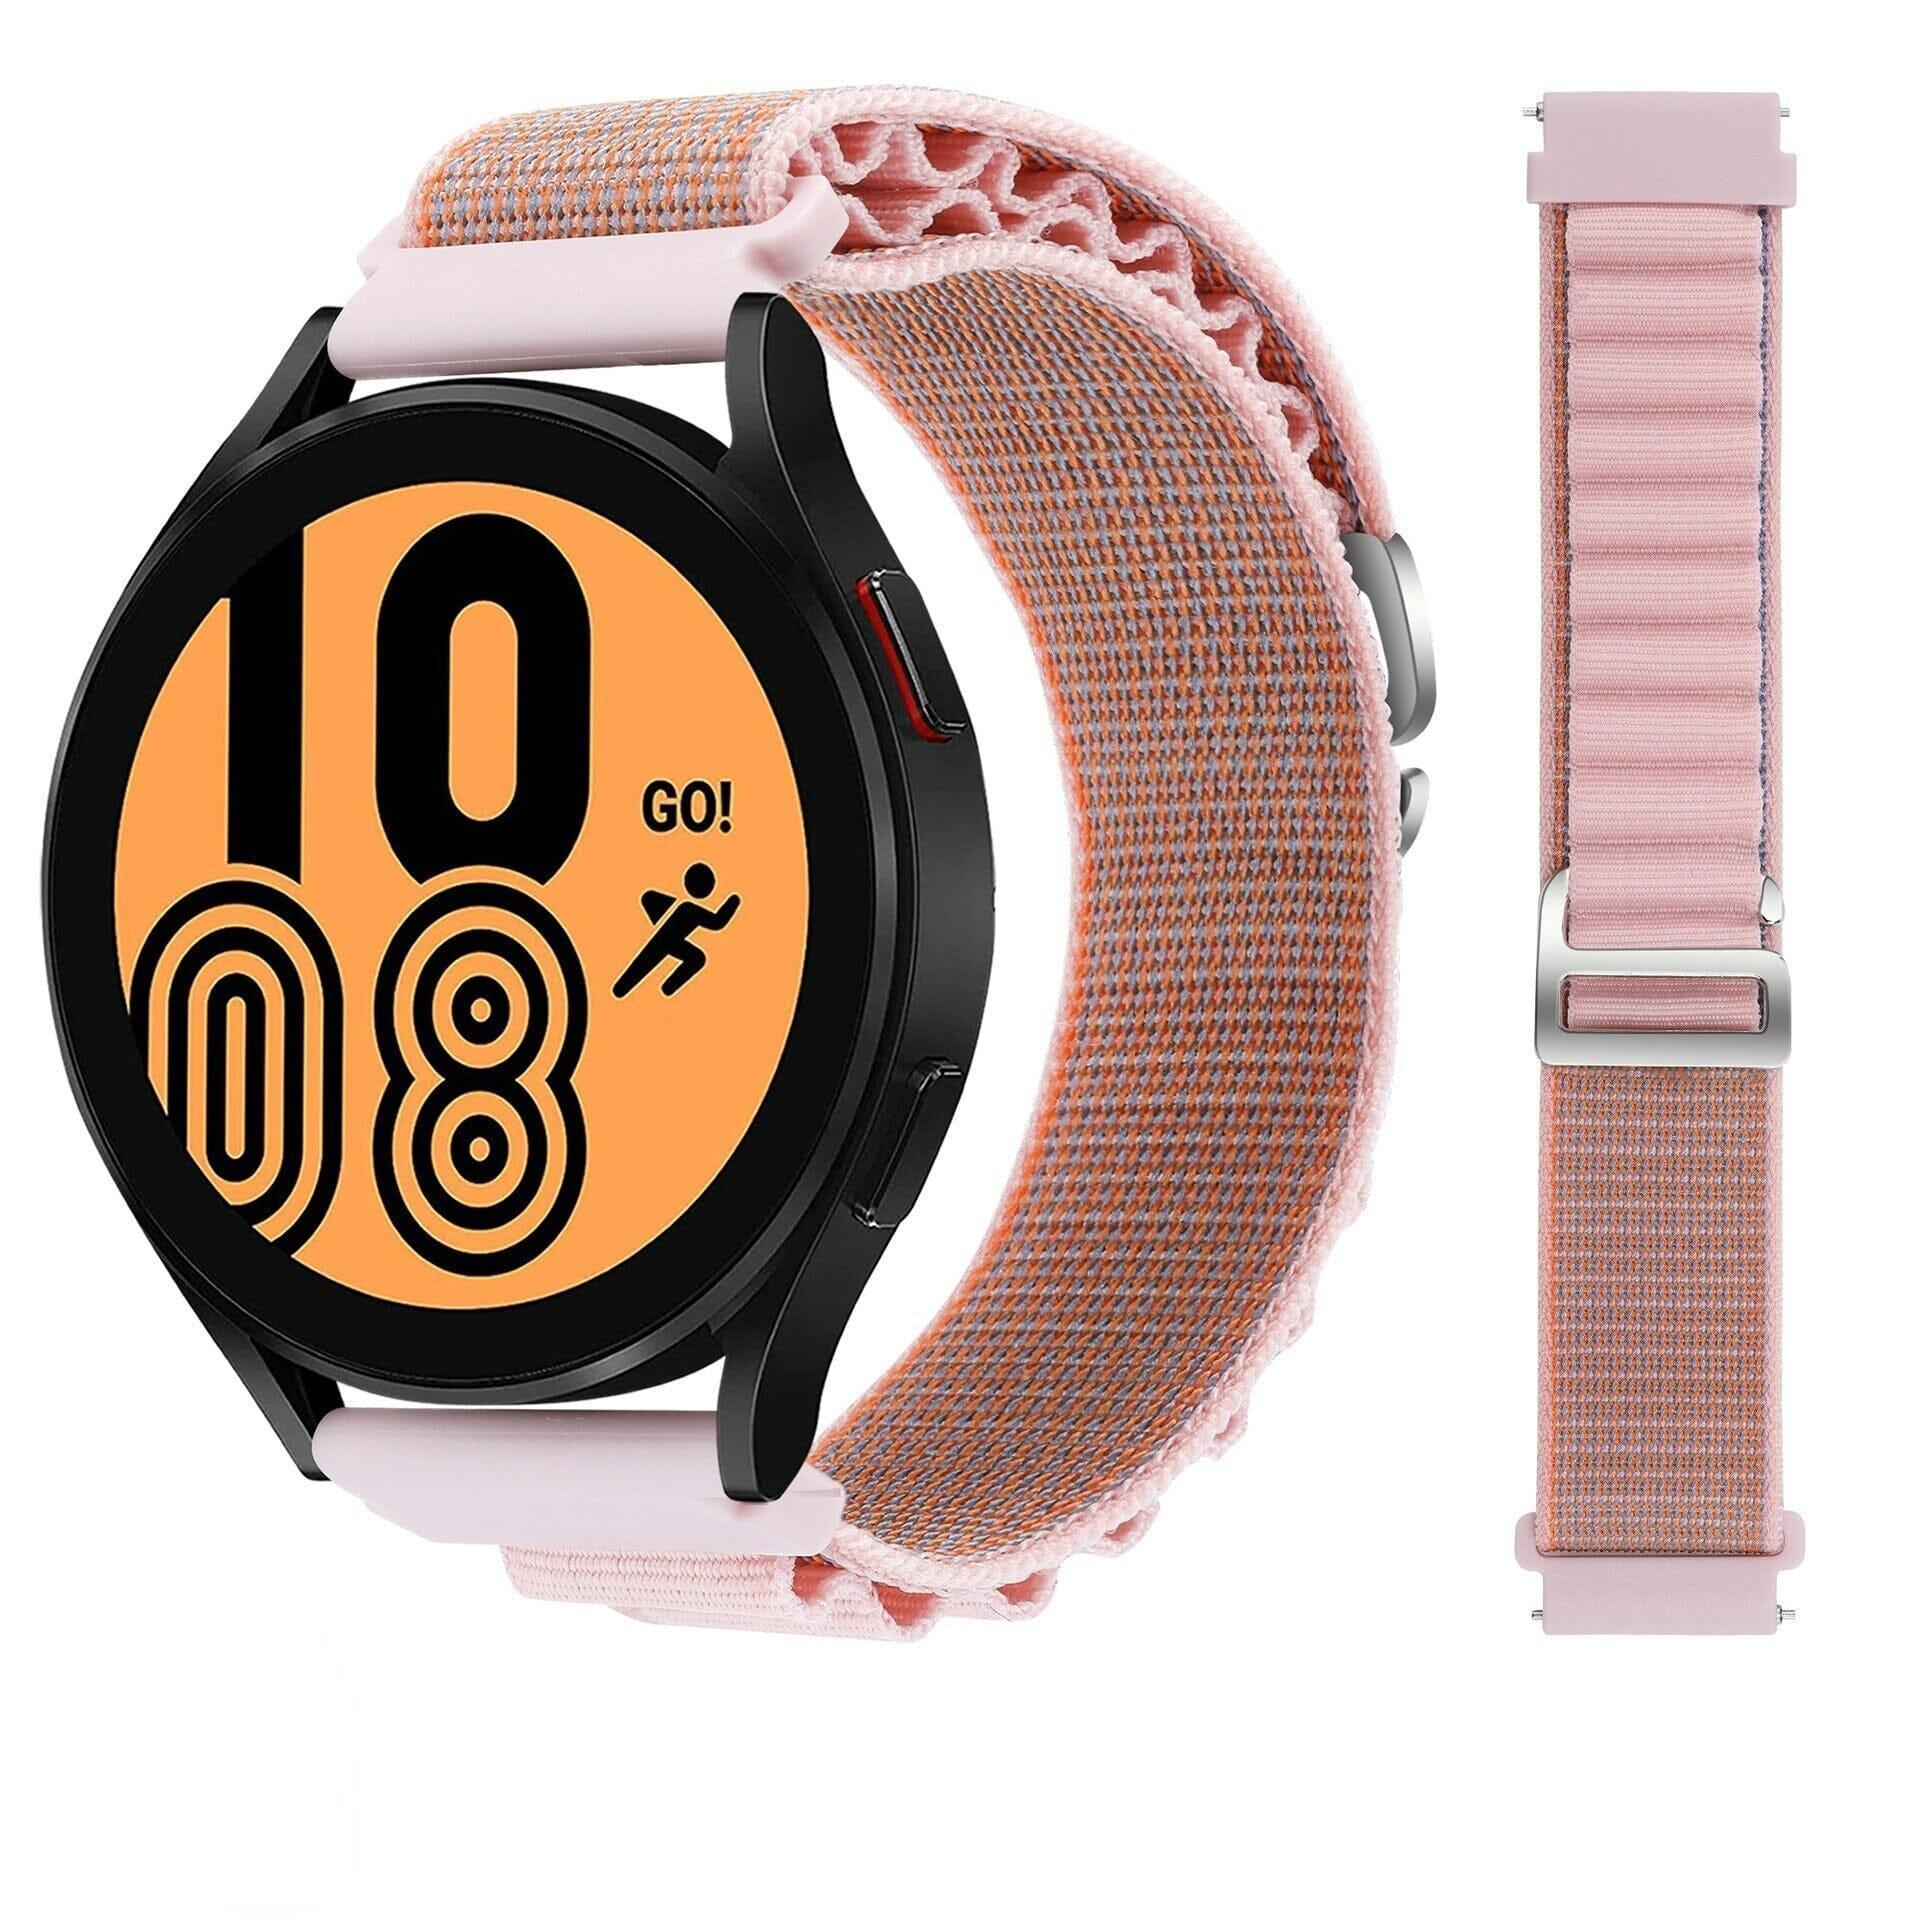 Alpine Loop Watch Straps Compatible with the Withings Steel HR (40mm & HR Sport), Scanwatch (42mm)